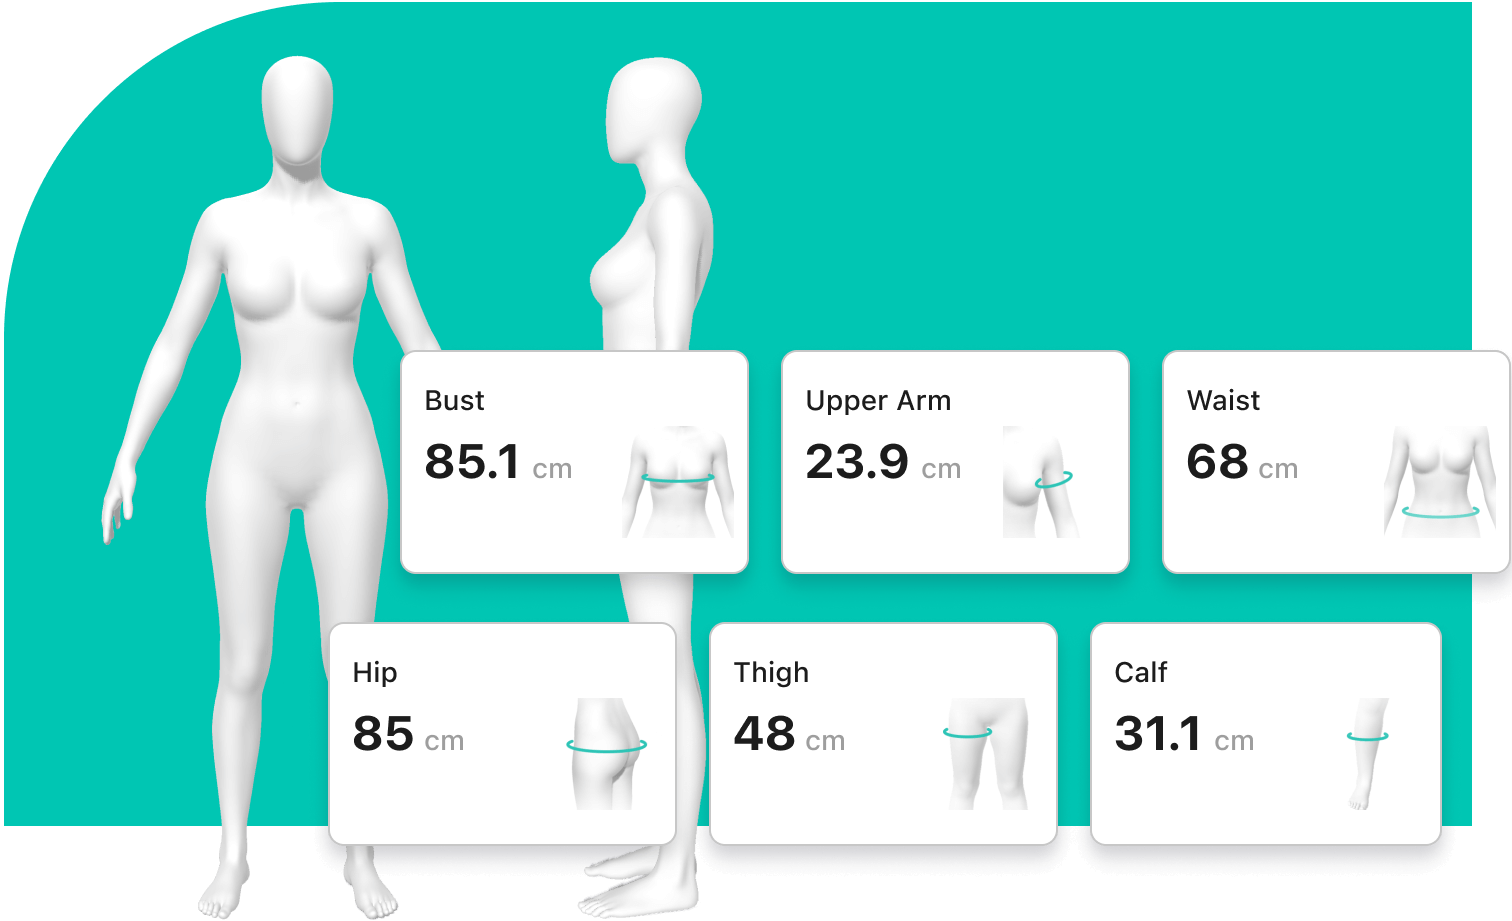 Instantly access body data to incorporate in your service